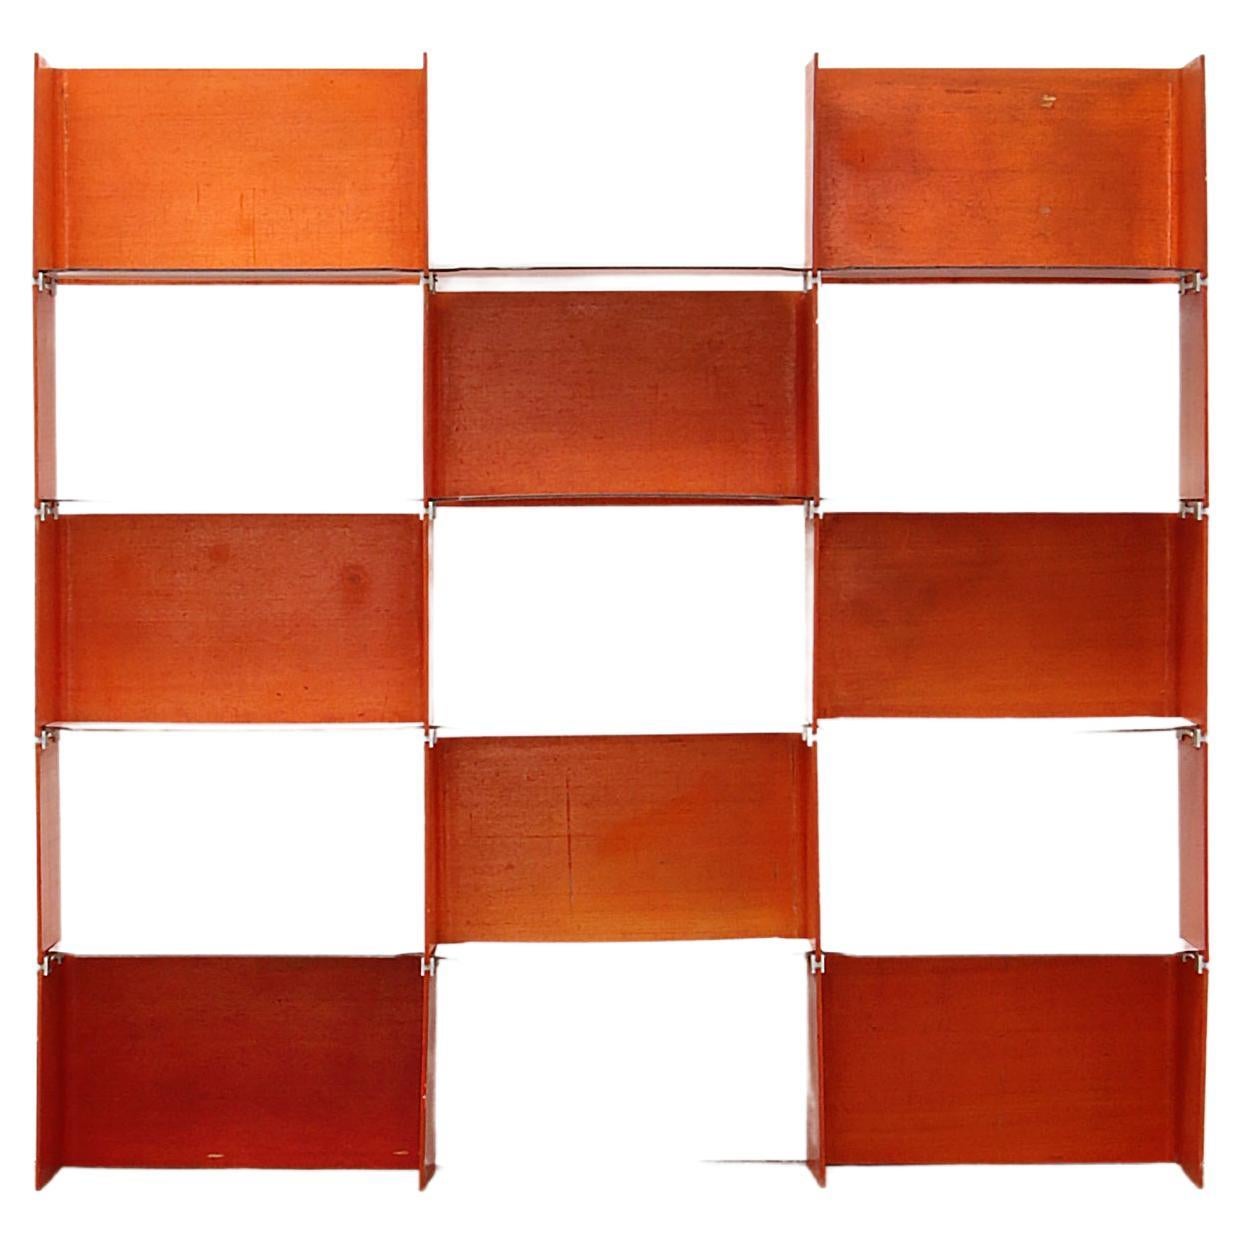 Modular French Wall Furniture Orange Made in the 60s